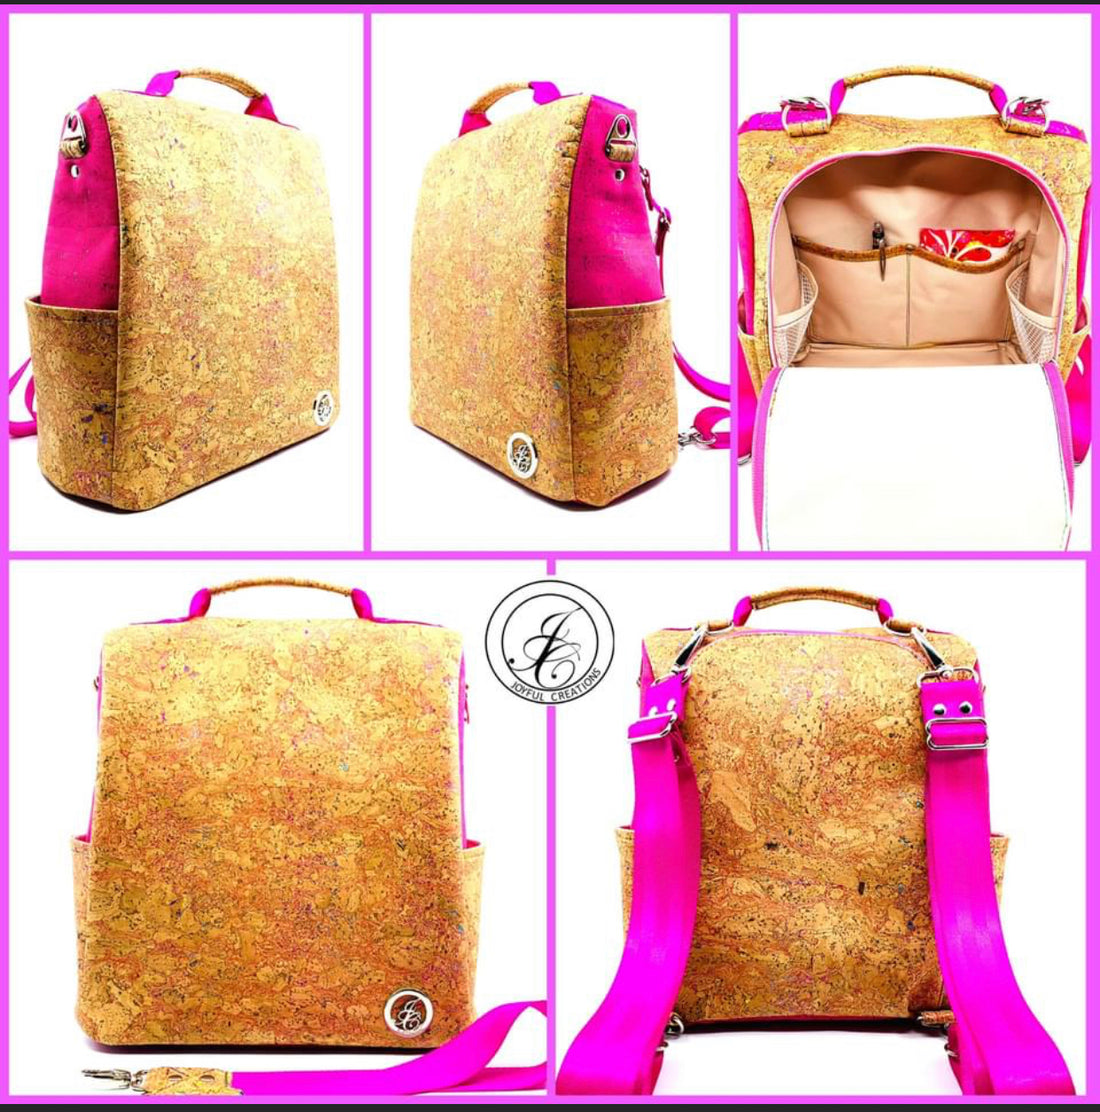 Small Backpack Anti Theft Leather, Sparkle Leather Backpack